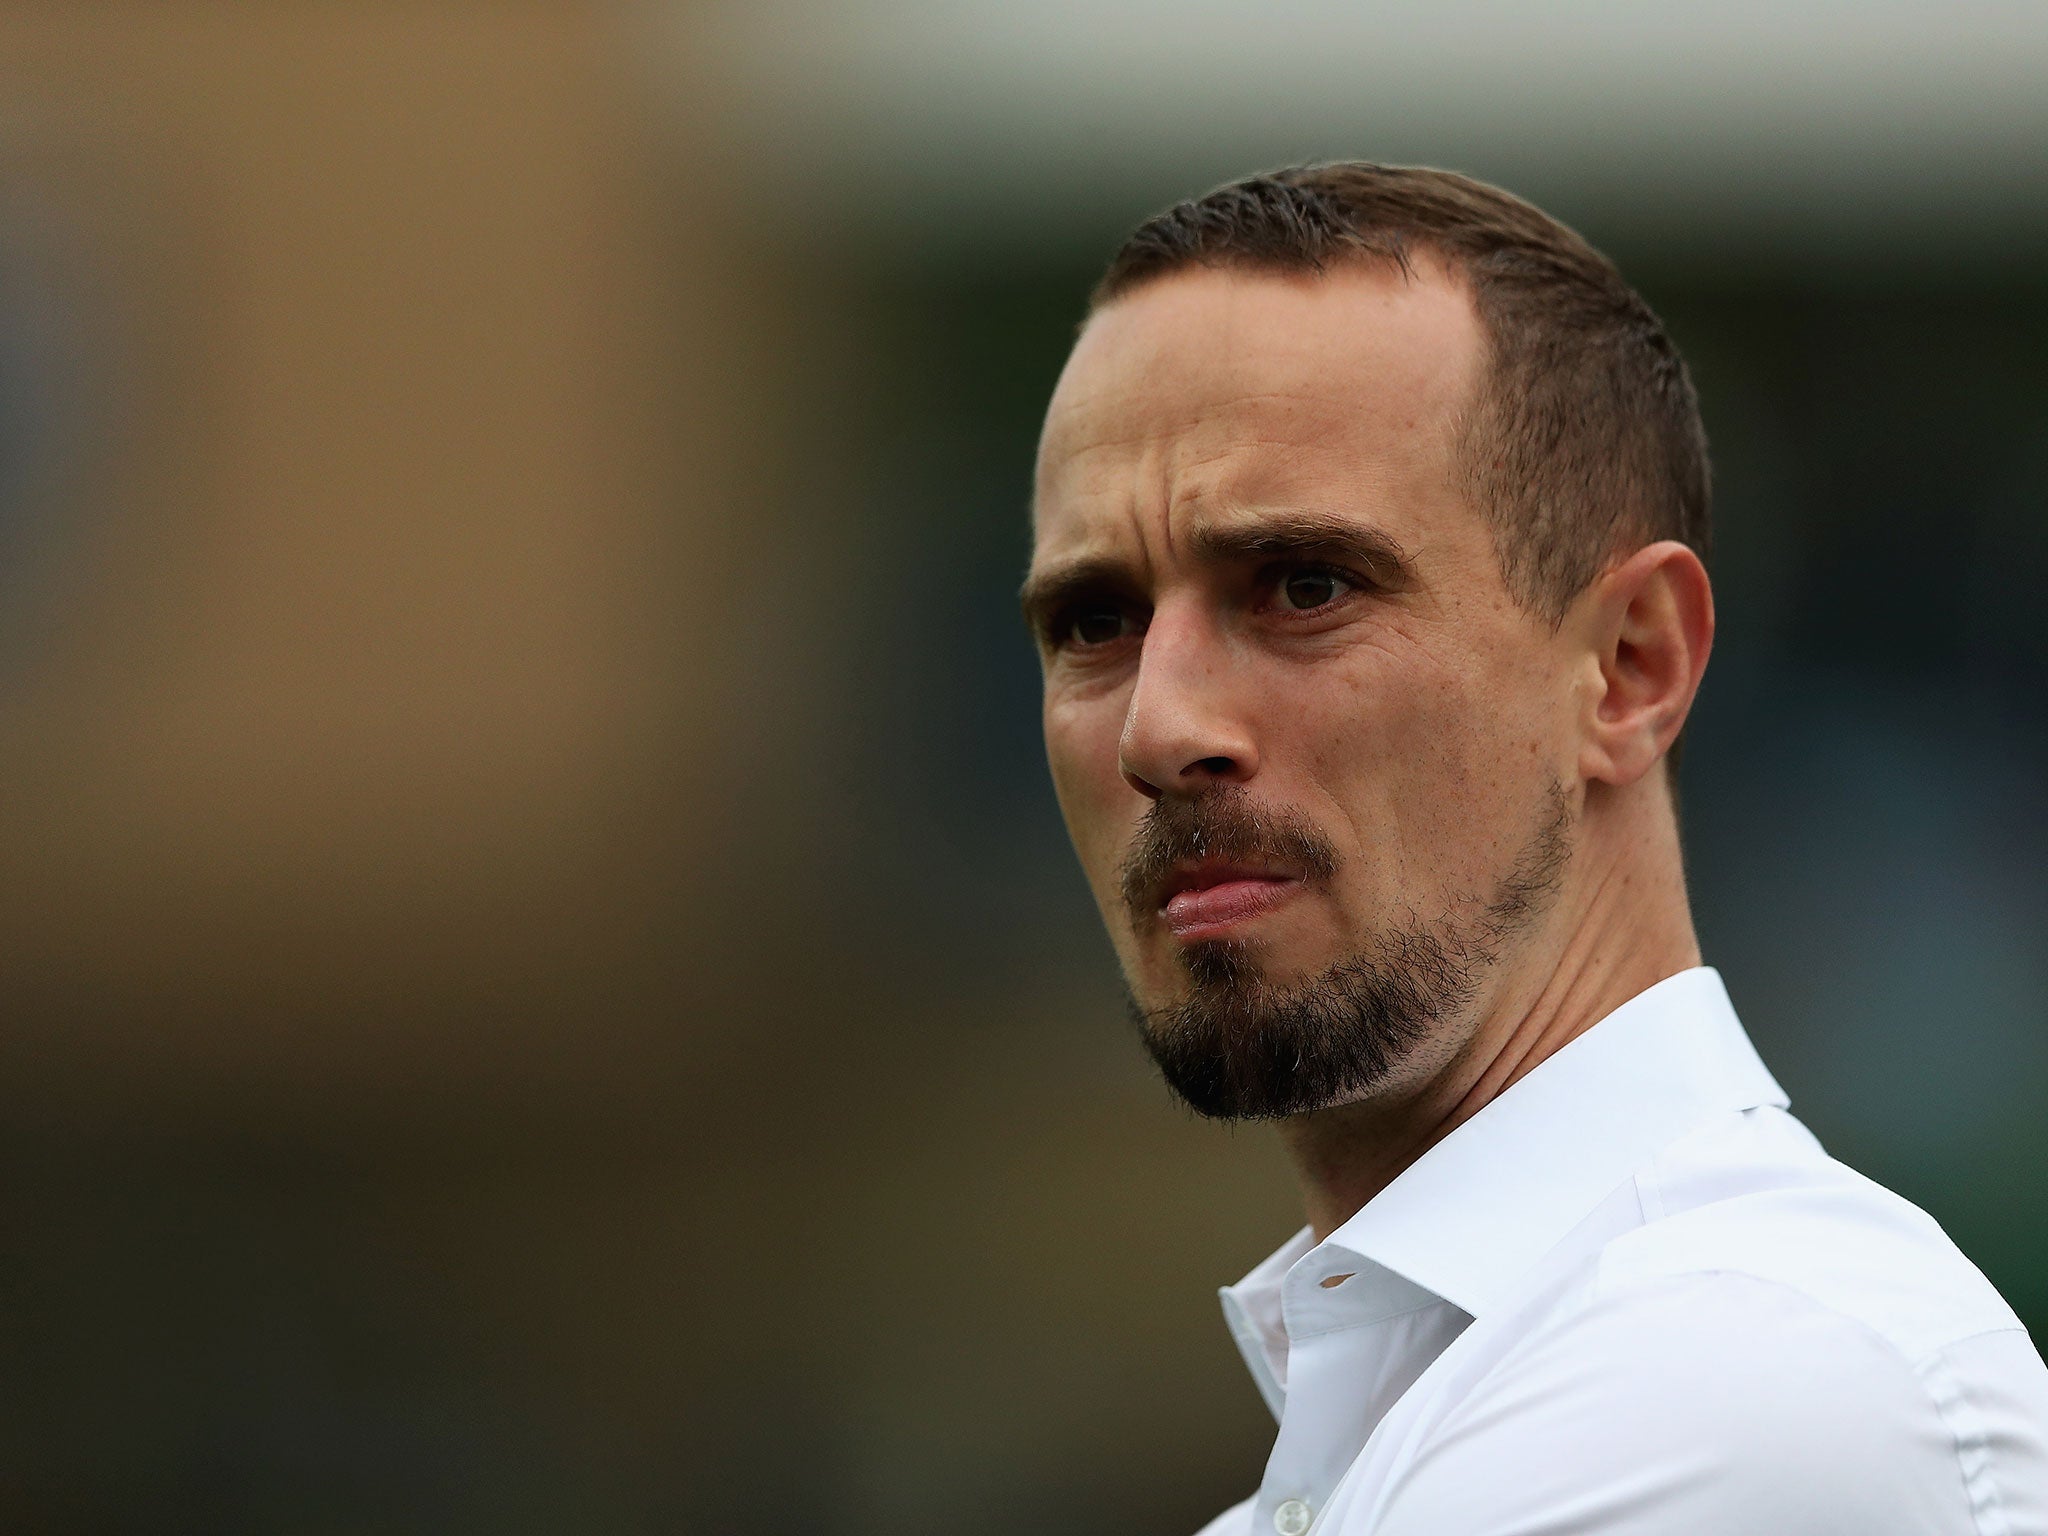 Mark Sampson has been sacked due to his "inappropriate behaviour" at Bristol